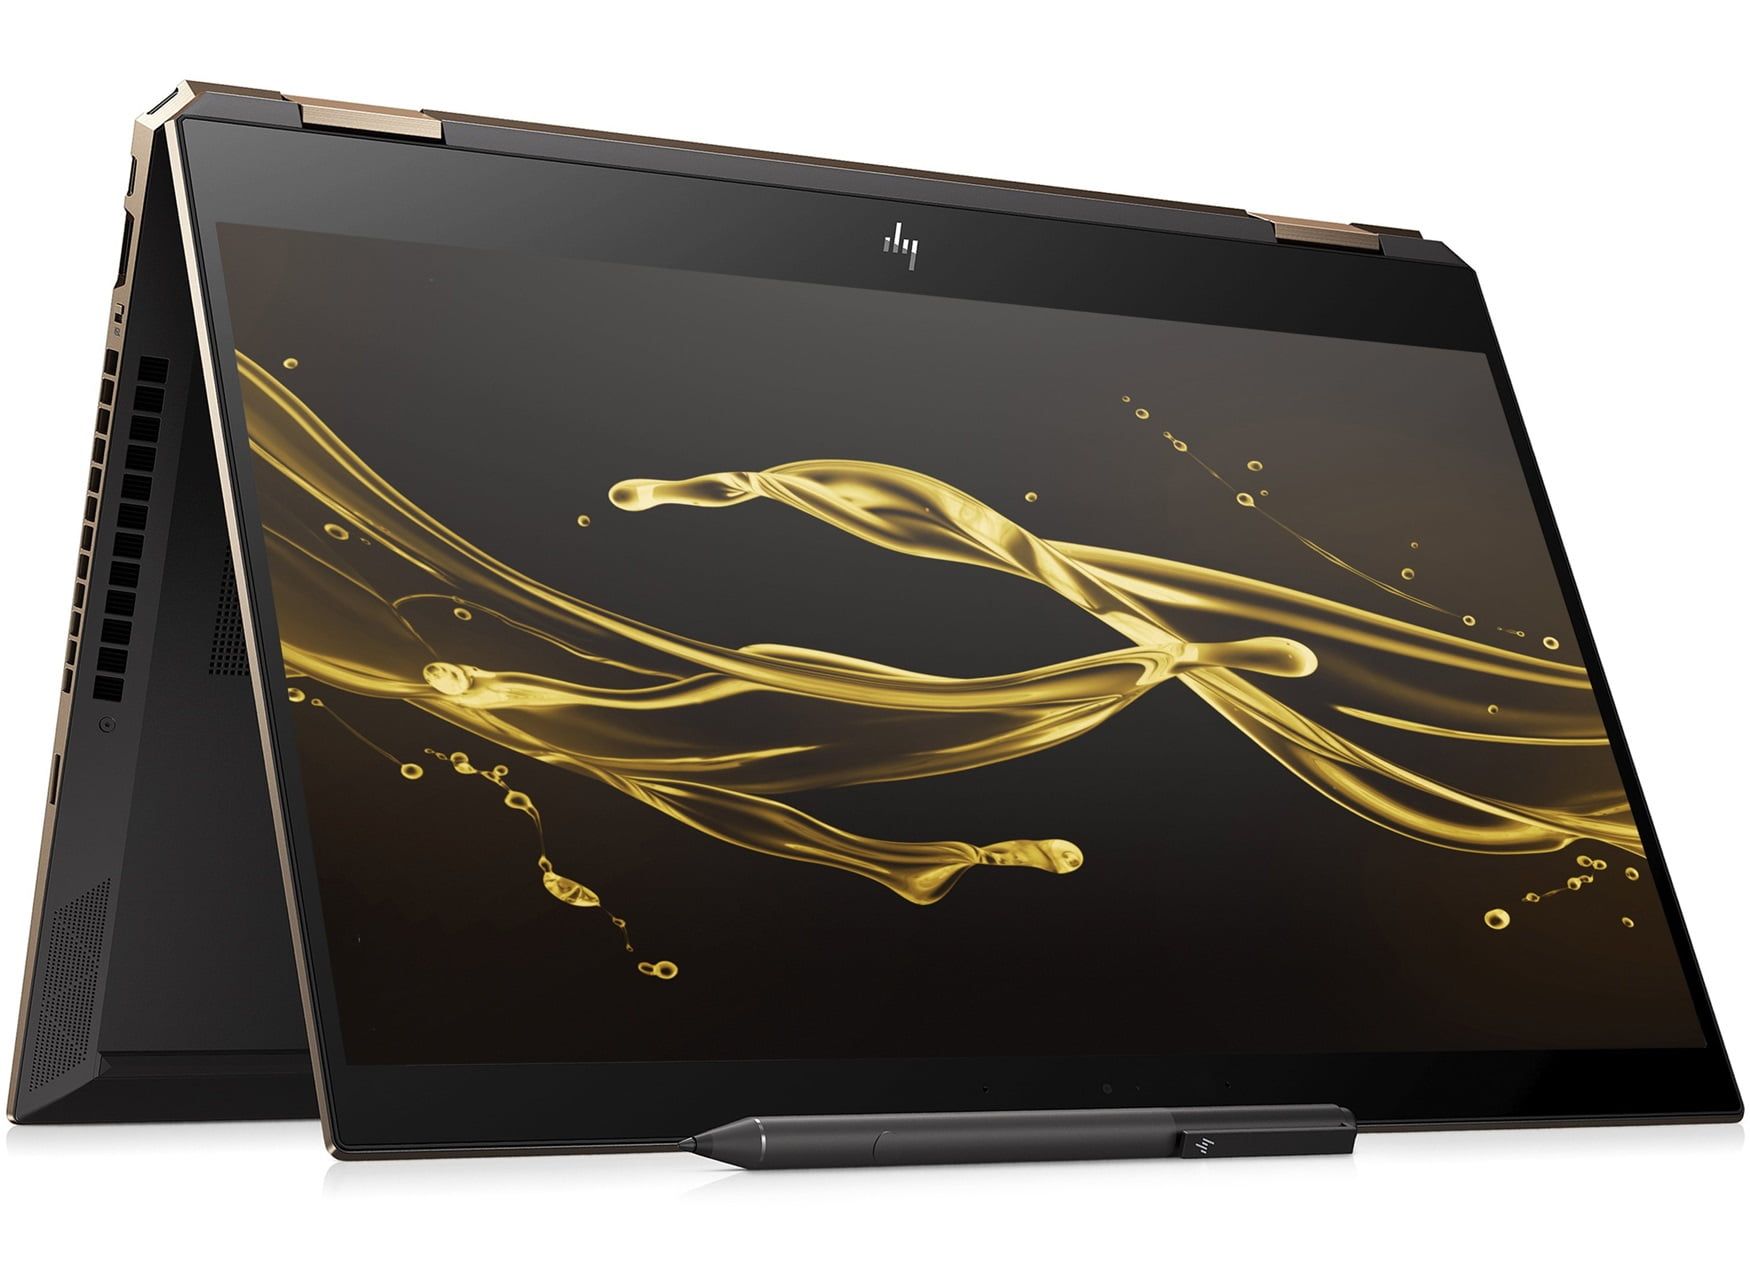 HP Spectre x360 is introduced: specs, price and release date